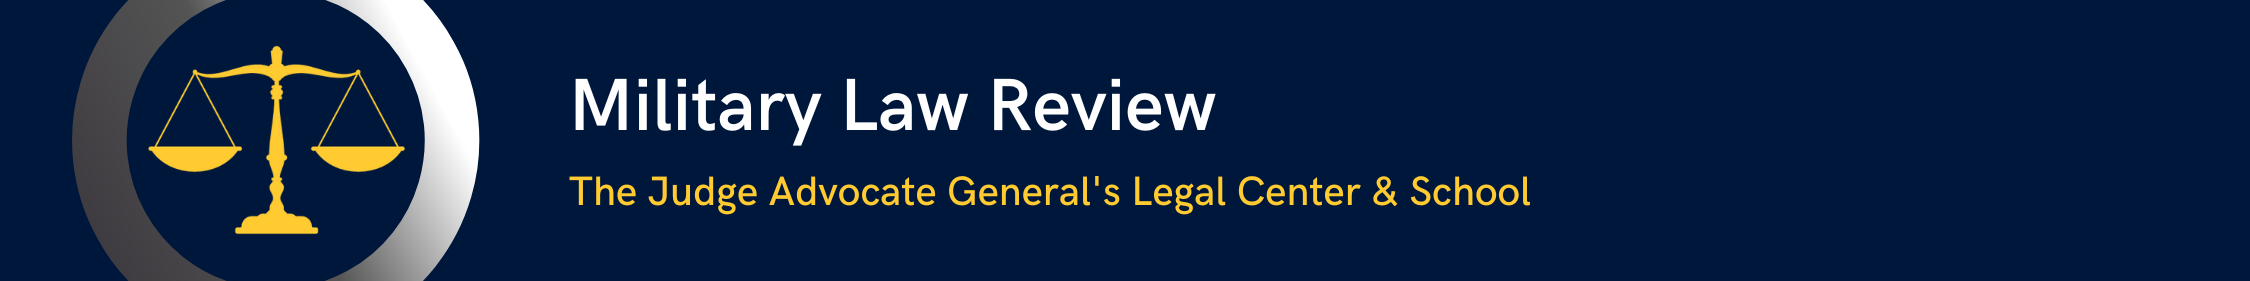 Military Law Review Banner